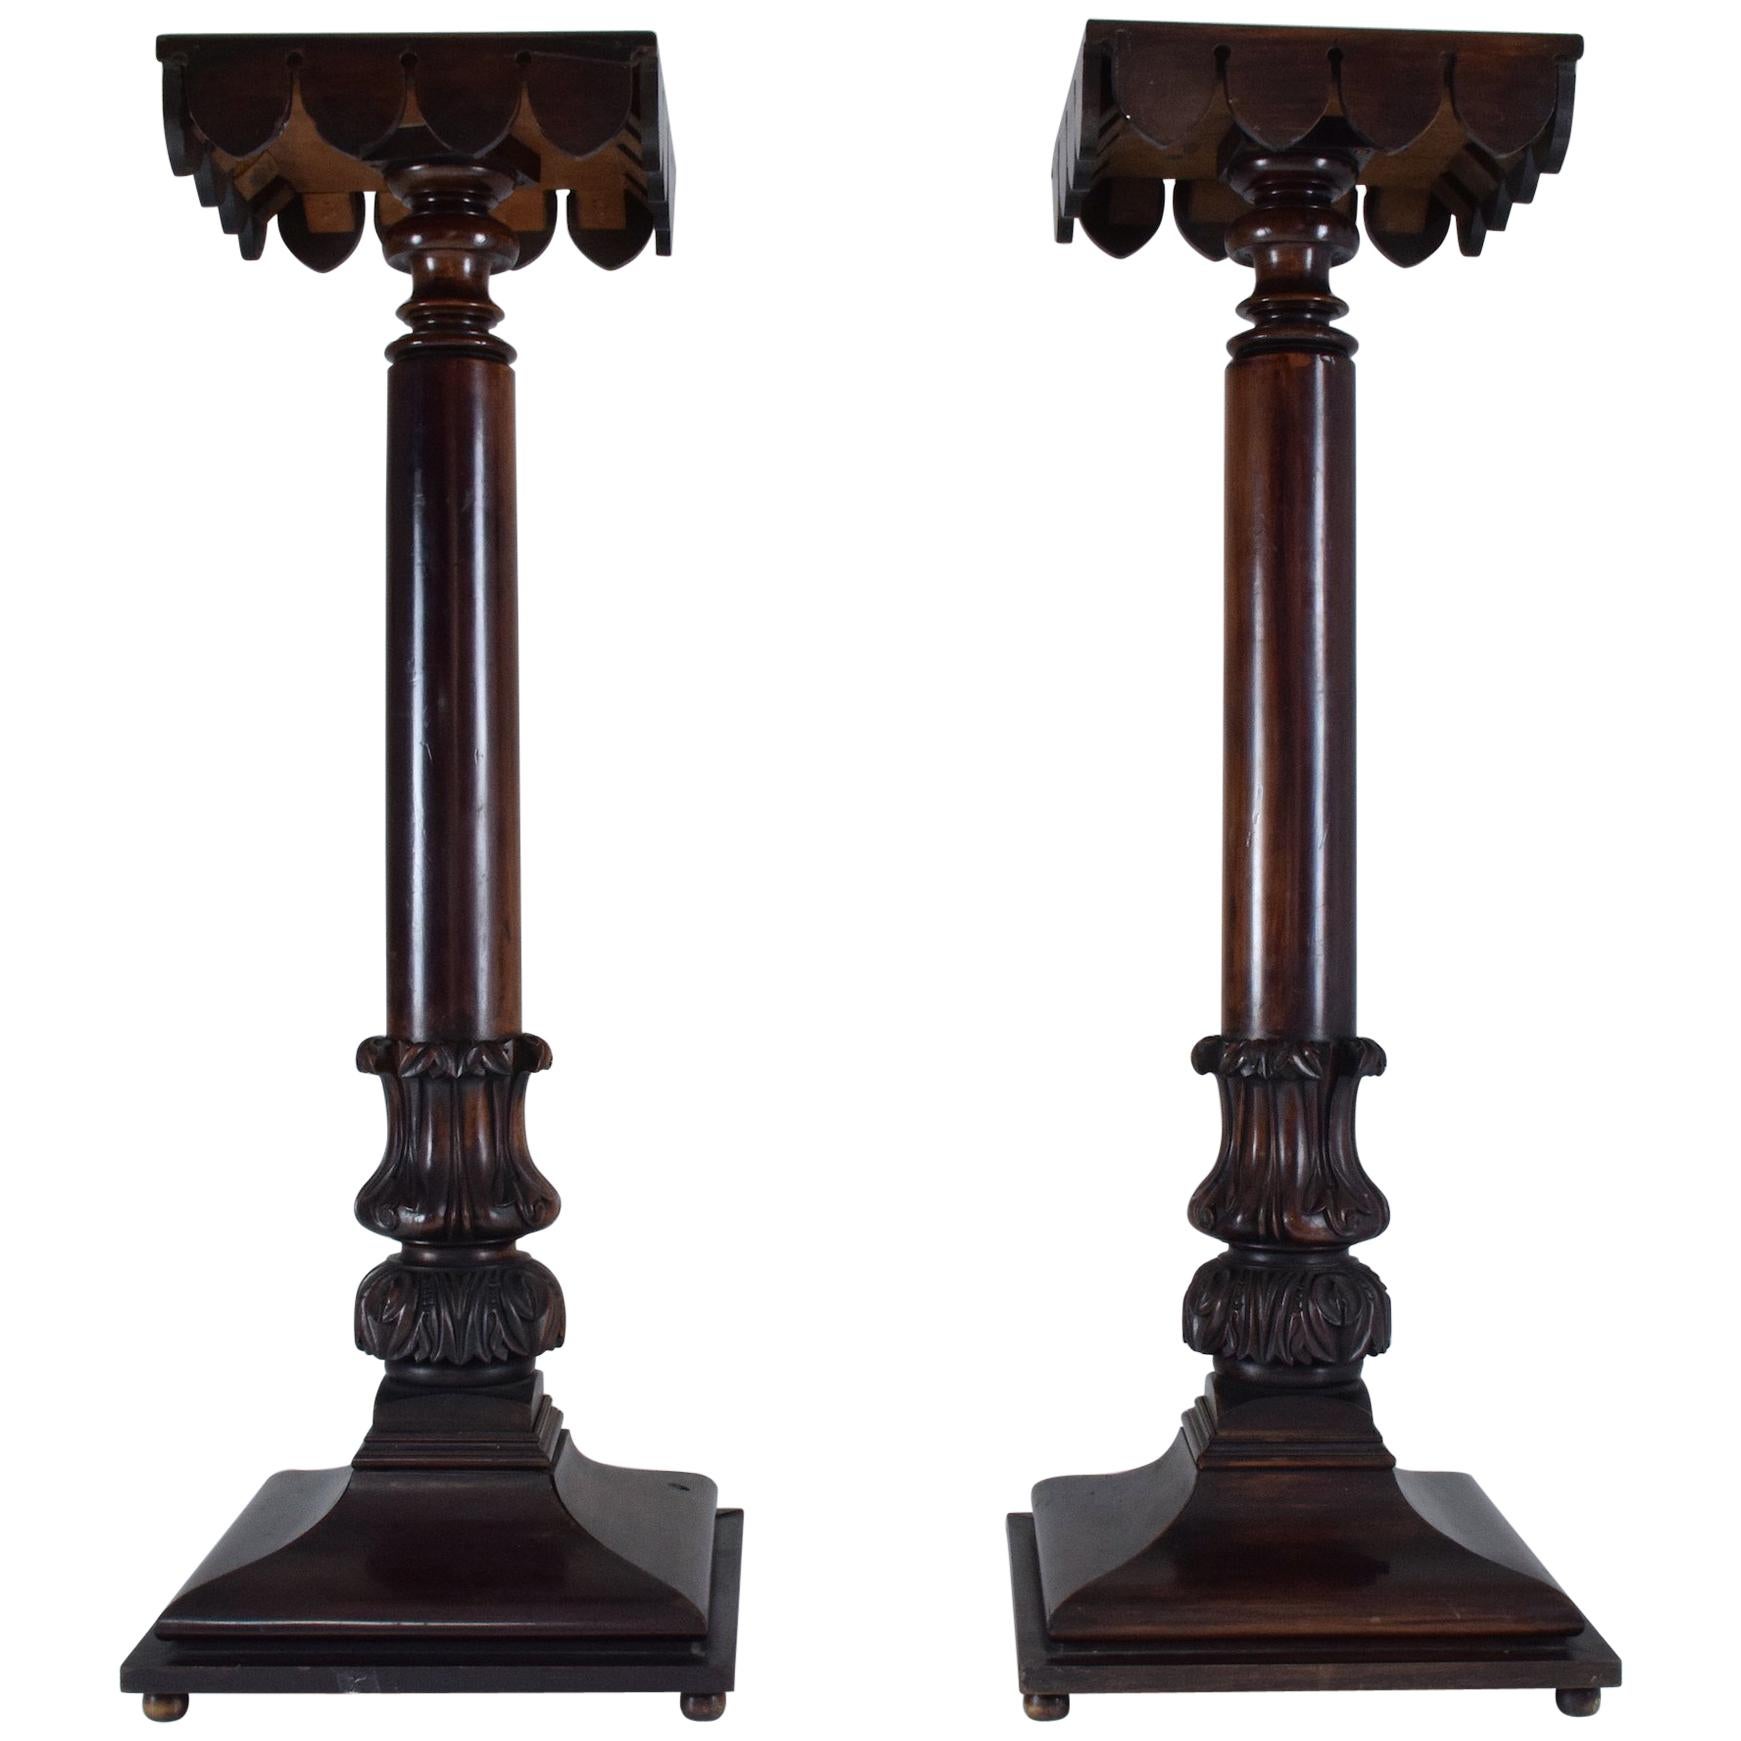 A wonderful set of two antique Italian pedestals or columns from the beginning of the 19th century for exhibiting ceramics, table lamps or decorative objects. In beautiful, refinished condition. Expertly sculpted out of solid mahogany.
   